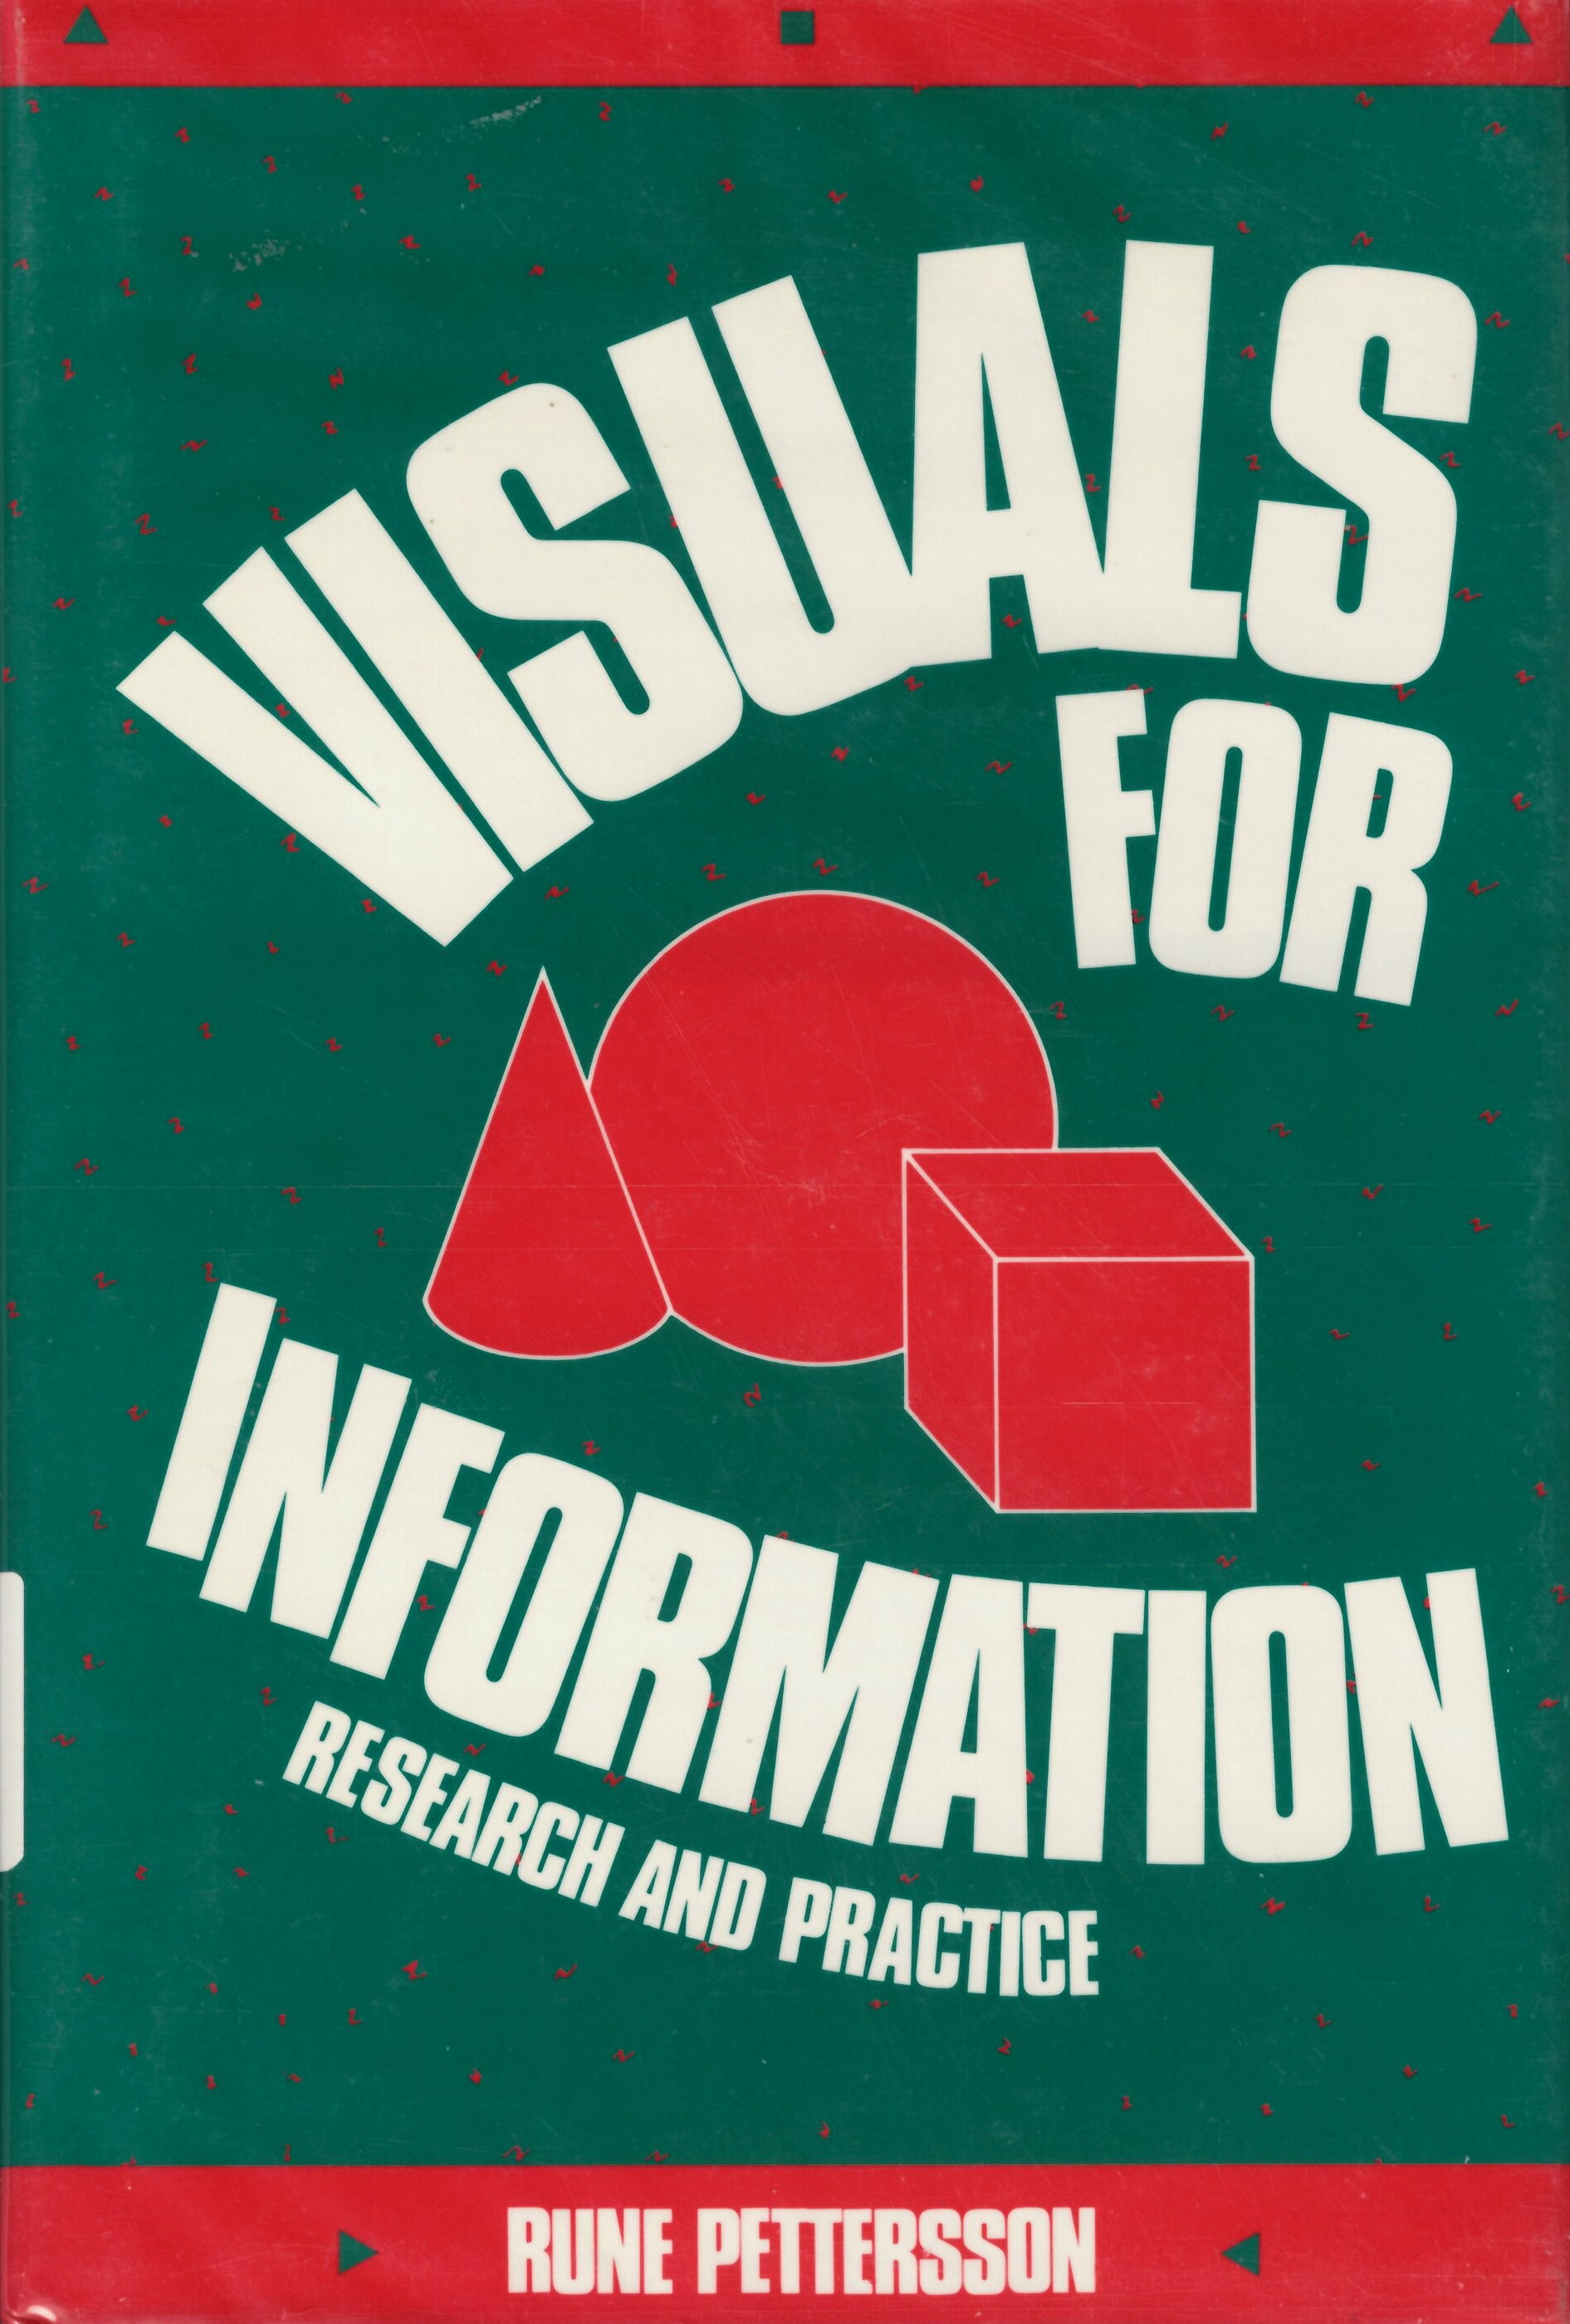 Visuals for information: research and practice /